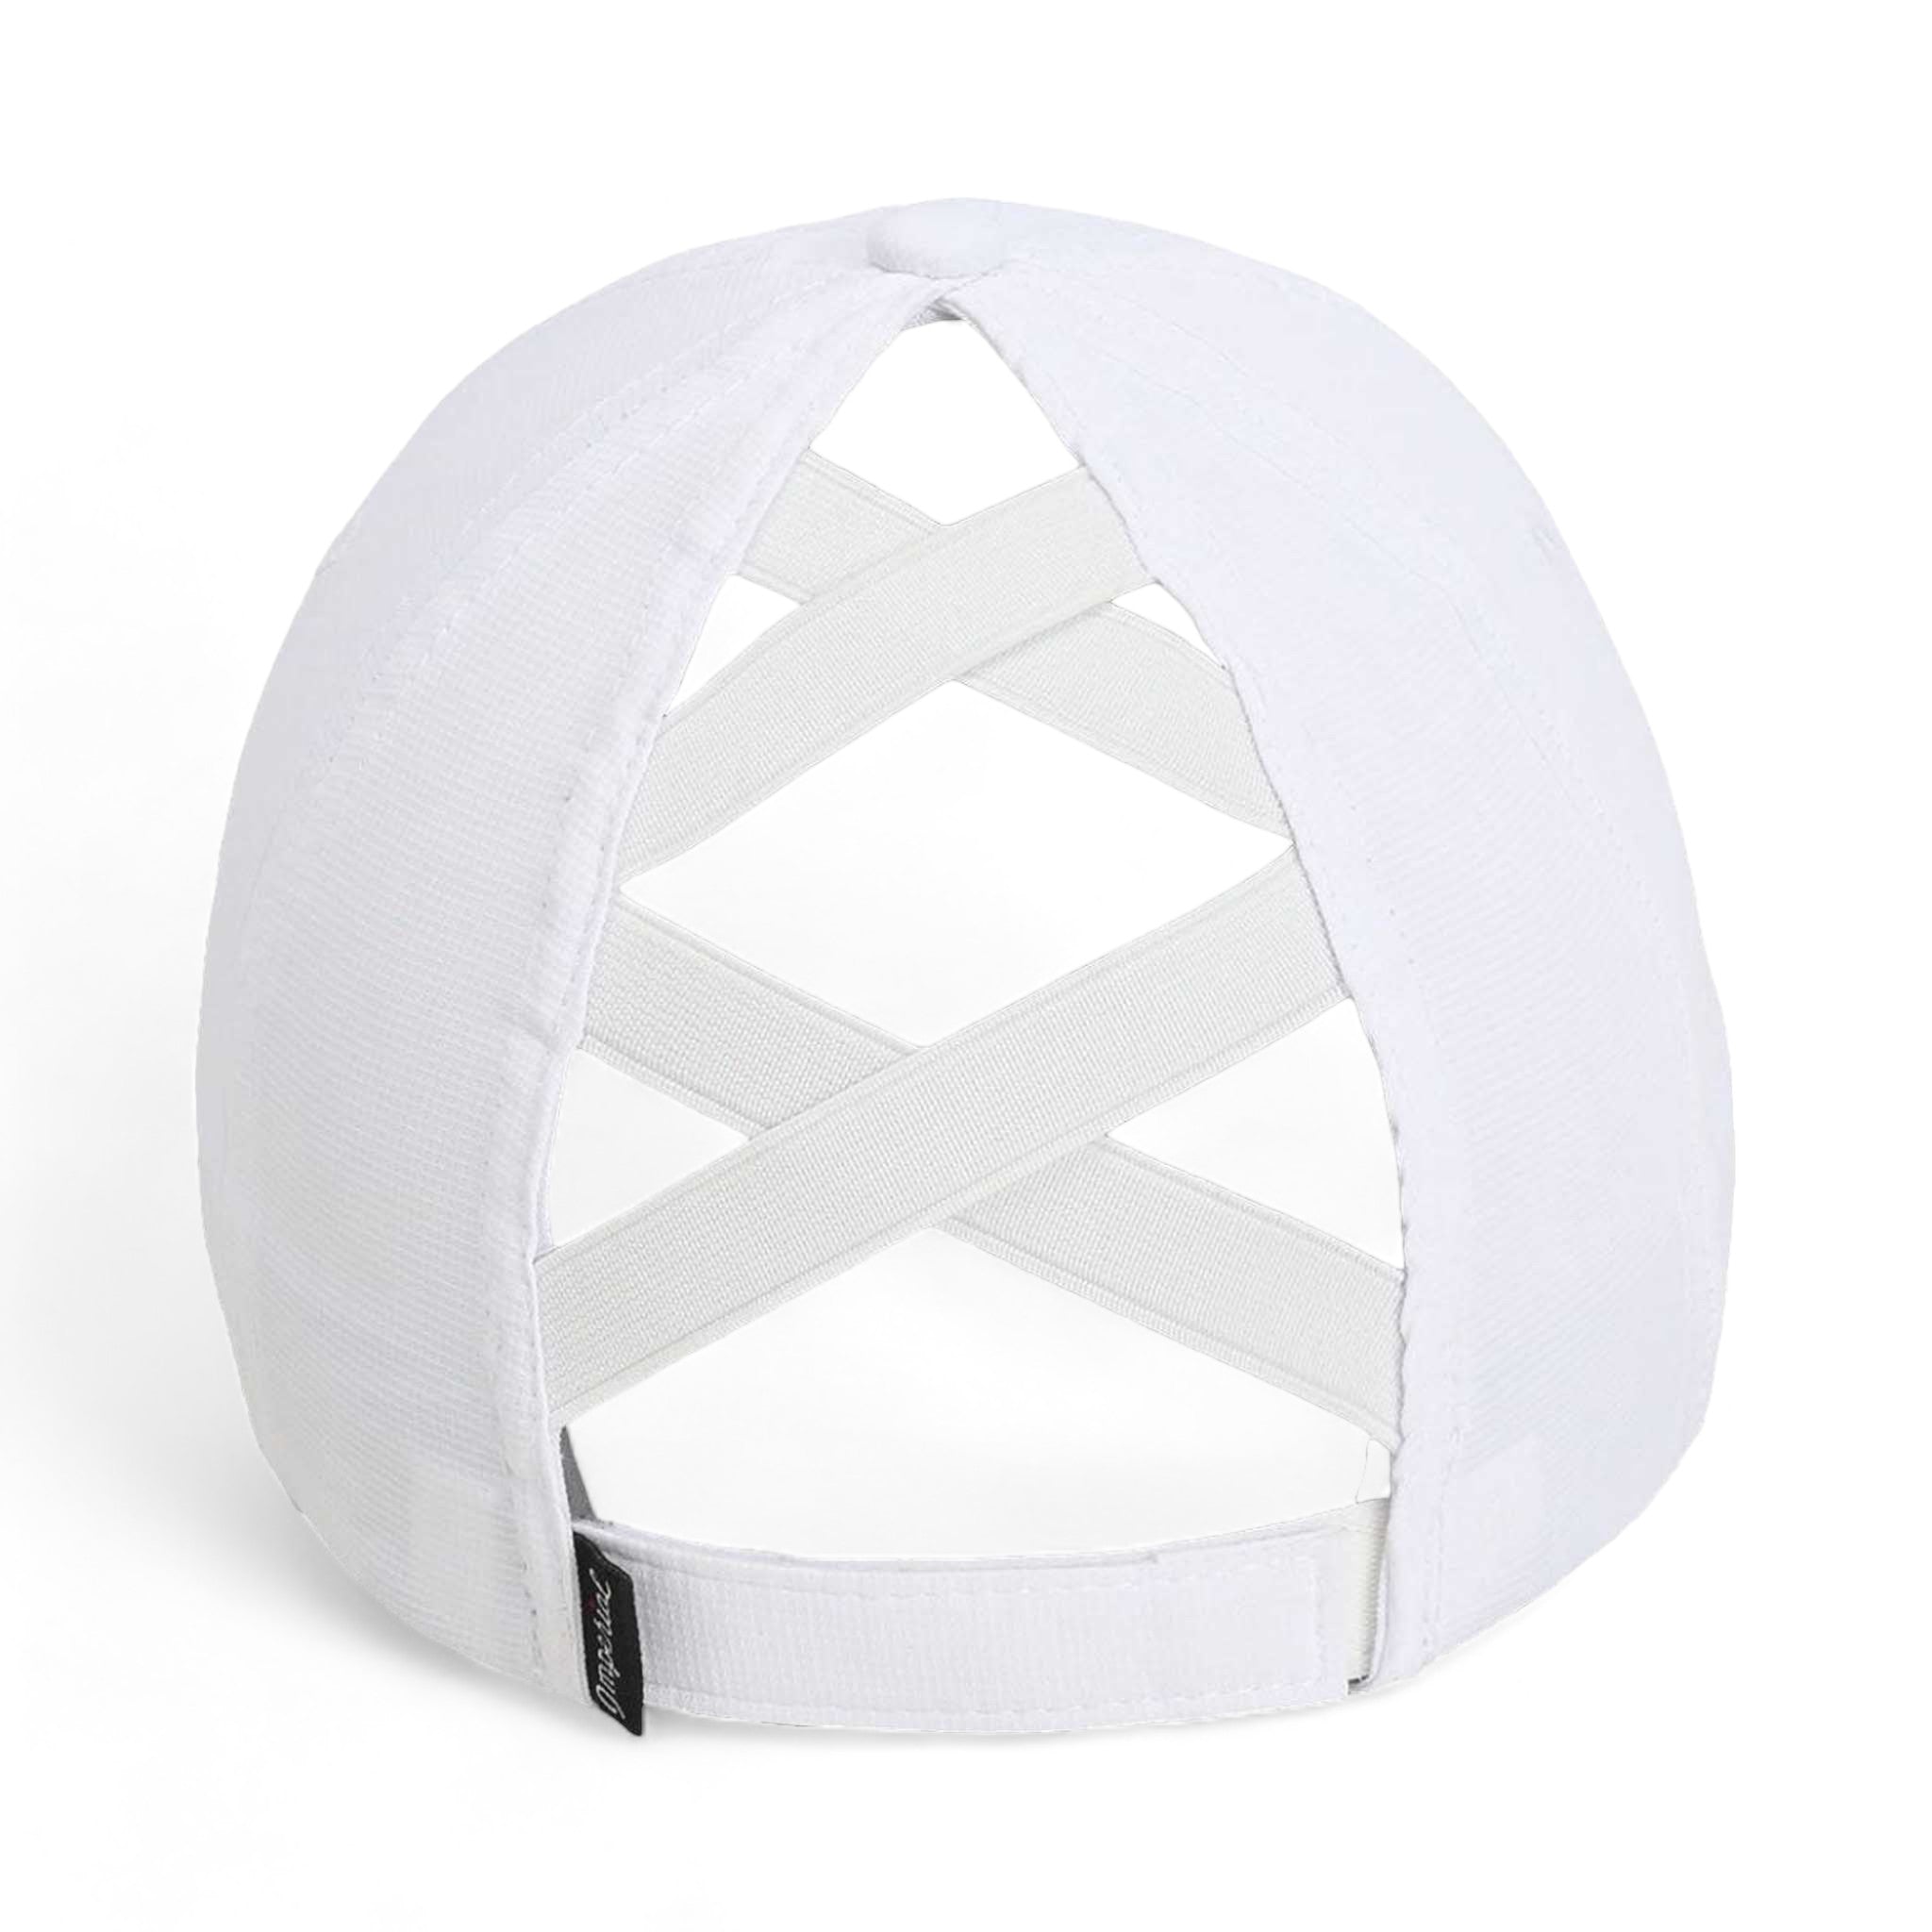 Back view of Imperial L338 custom hat in white